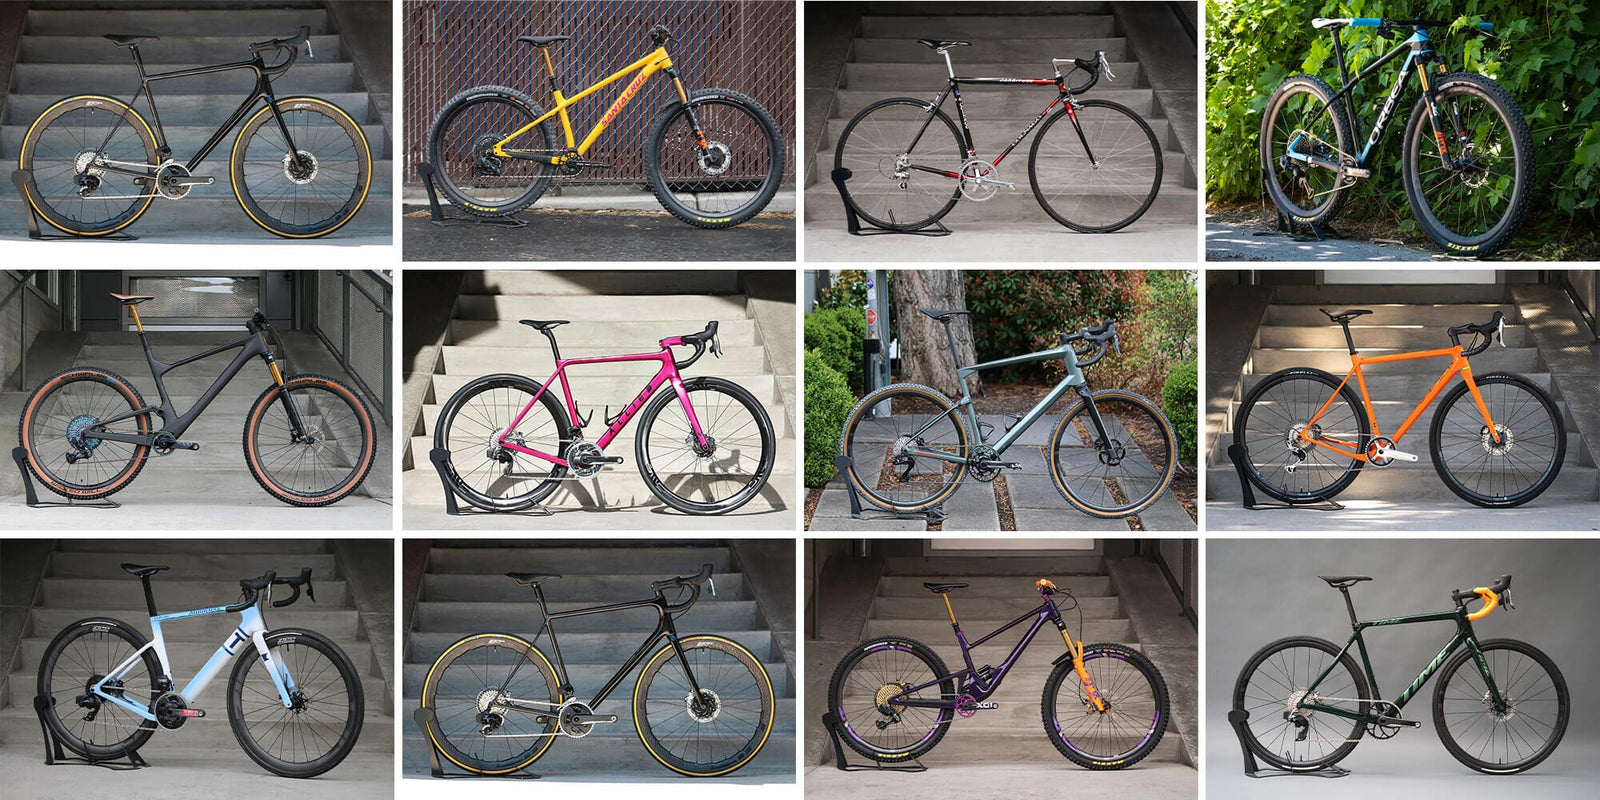 Place Your Vote for Favorite Beautiful Bicycle of 2022